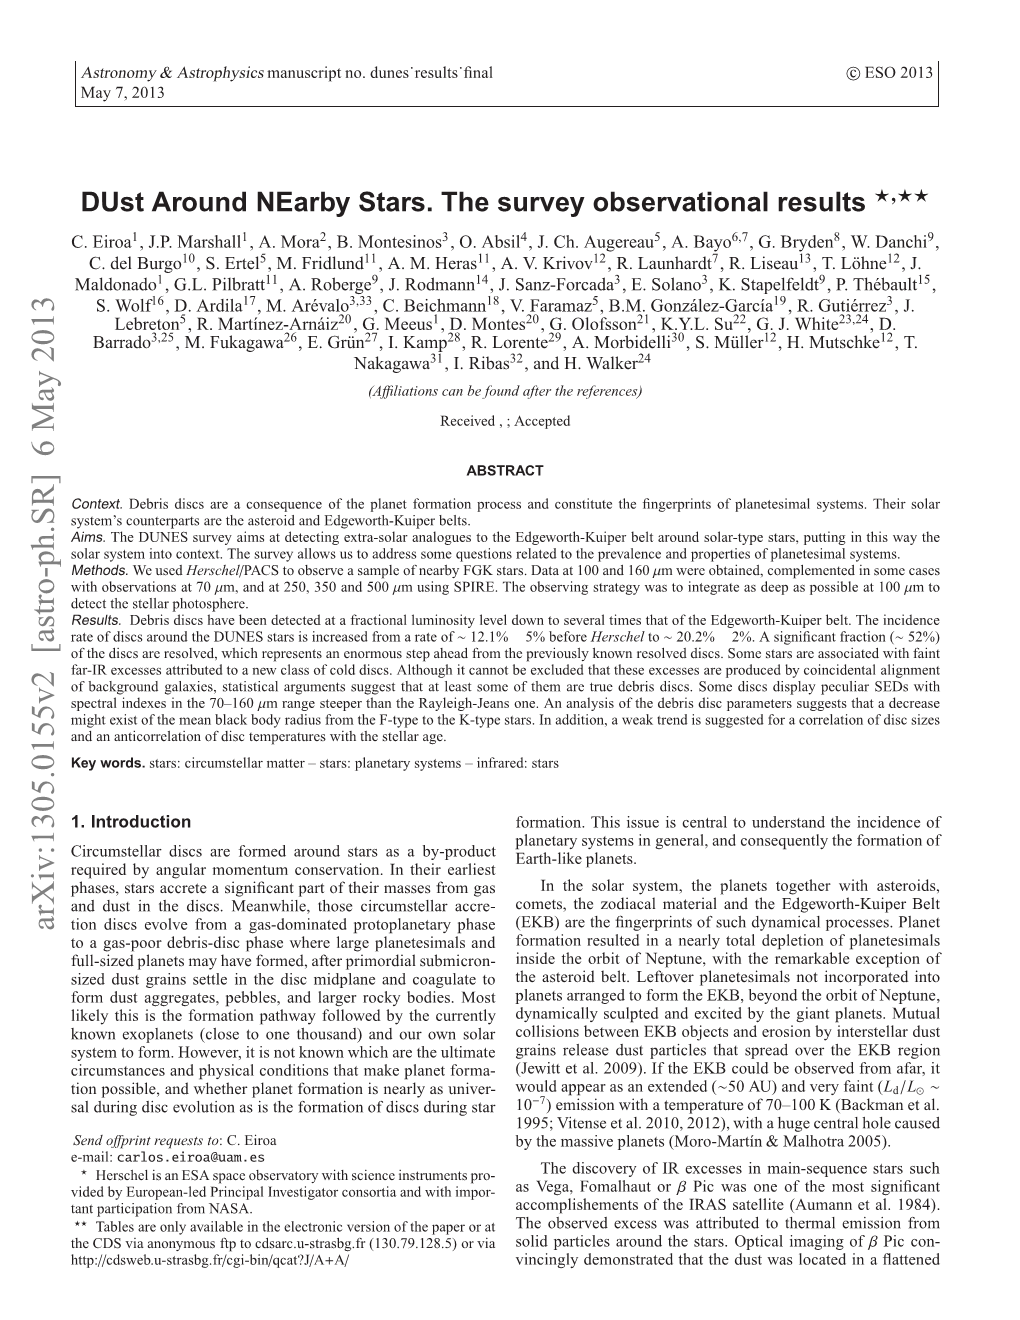 Dust Around Nearby Stars. the Survey Observational Results Circumstellar Disc (Smith & Terrile 1984)